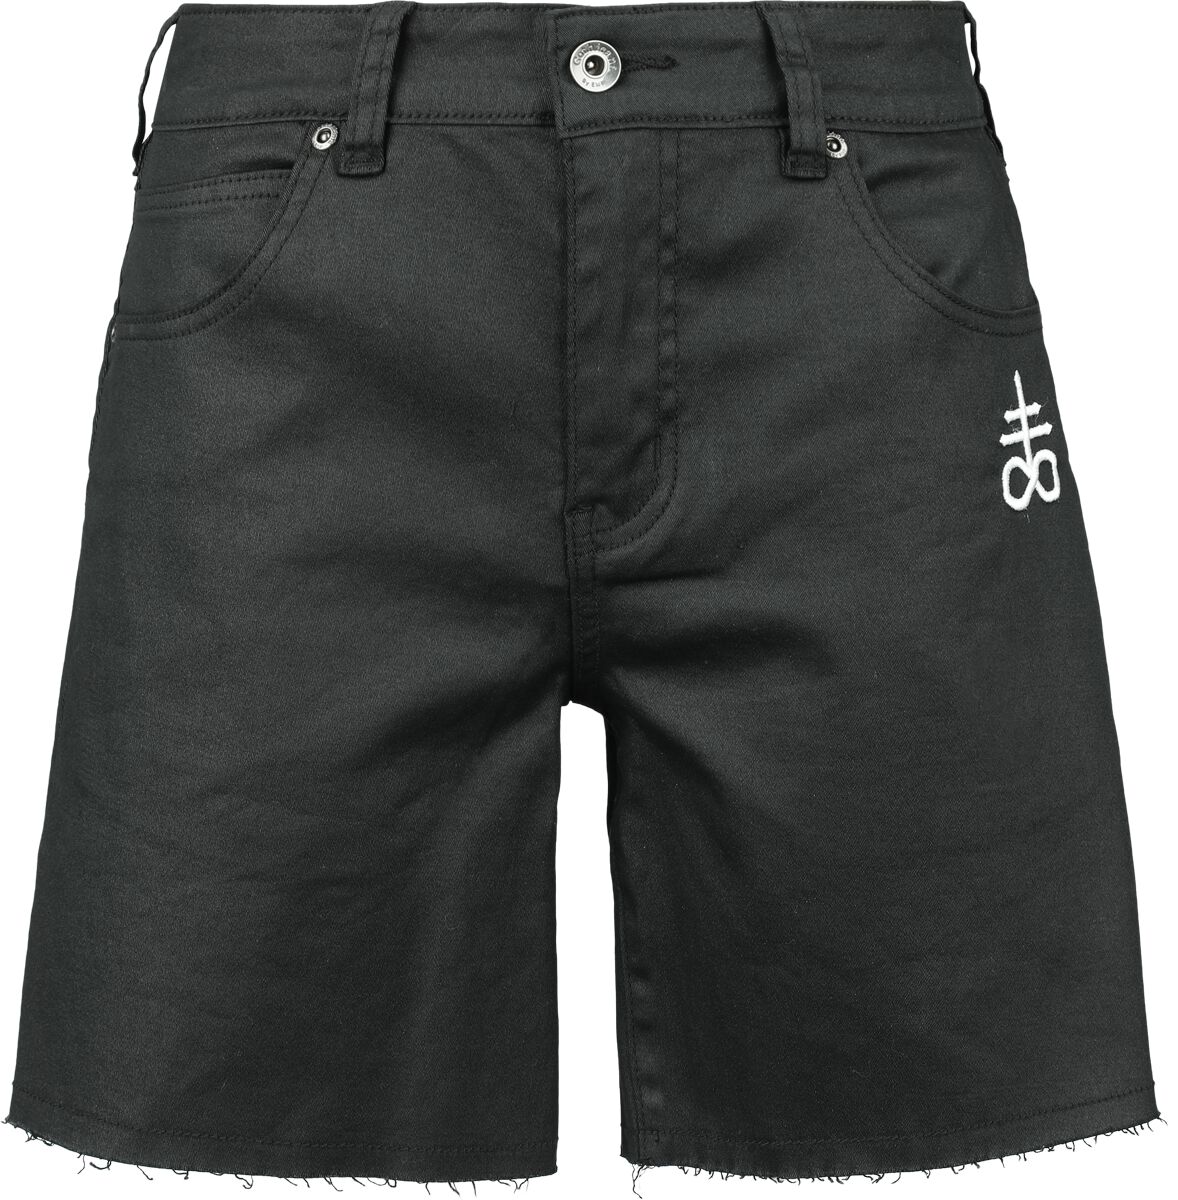 Black Blood by Gothicana Coated Shorts with Small Embroidery Short schwarz in 30